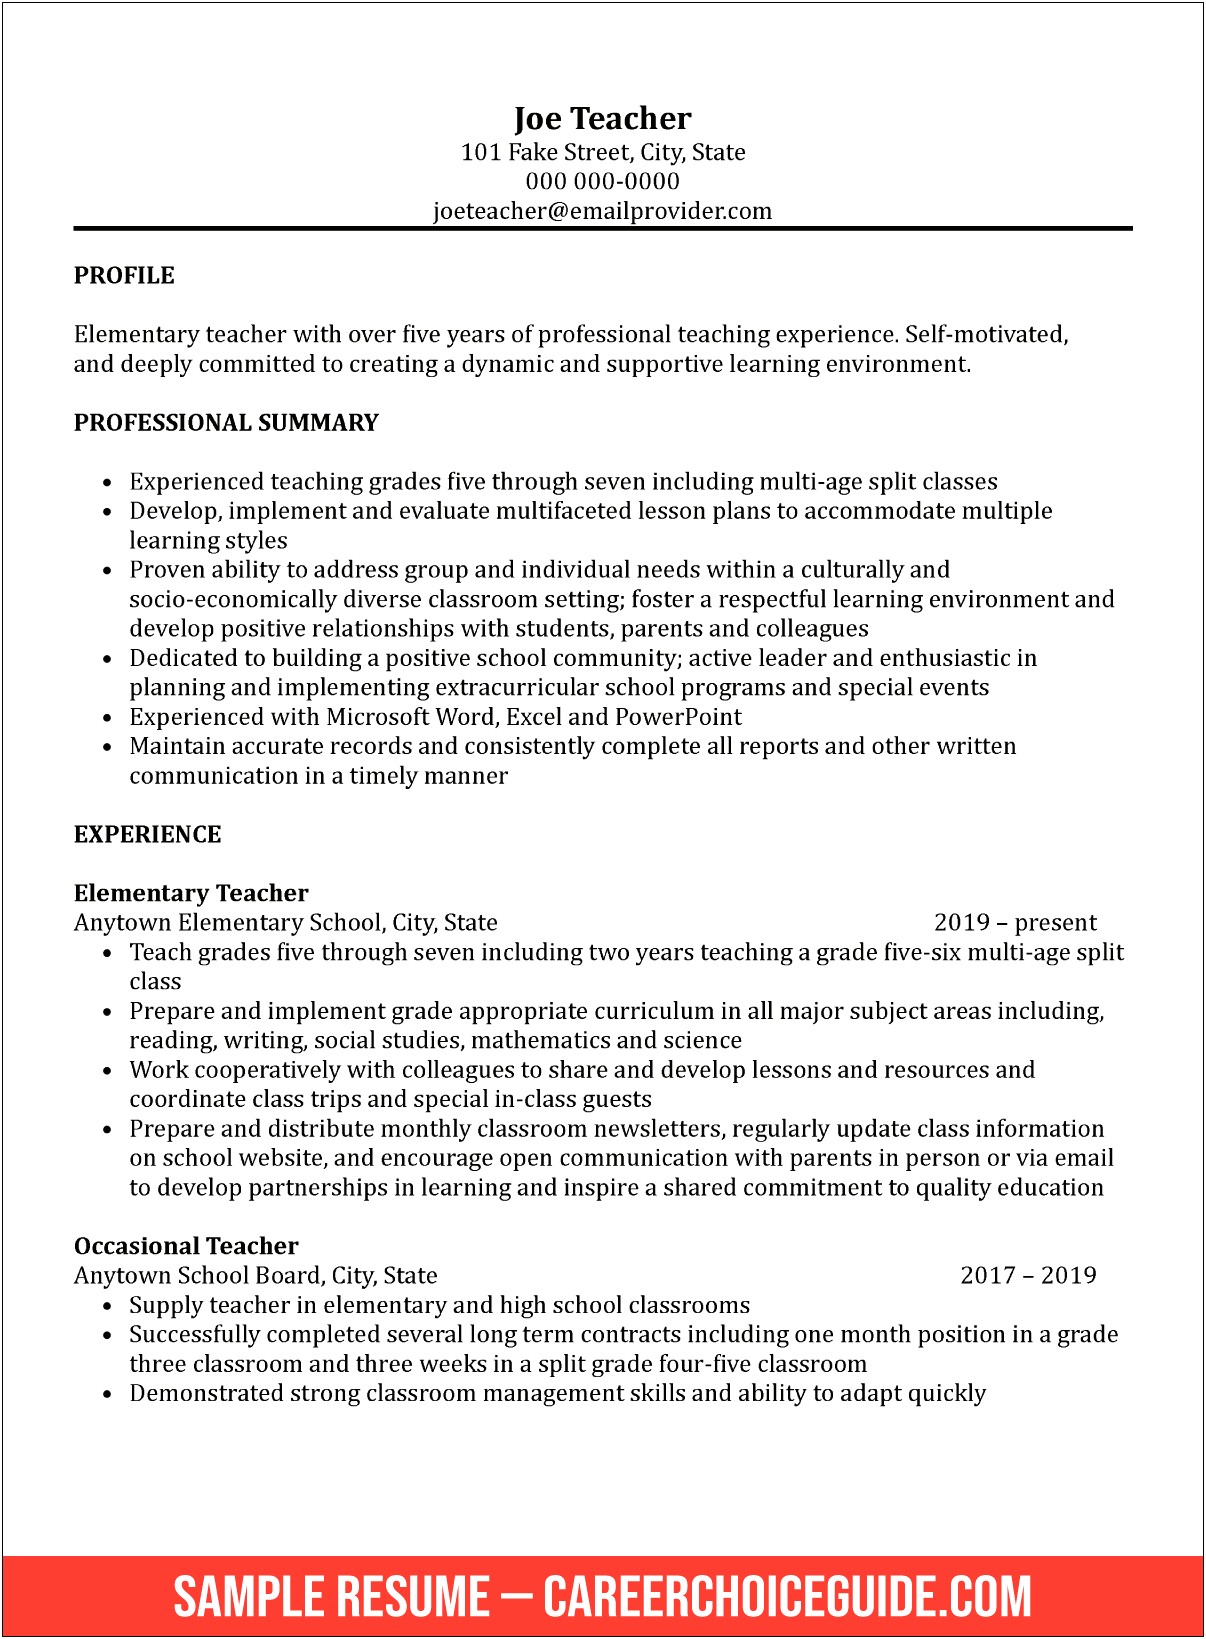 Sample Summaries For A Resume